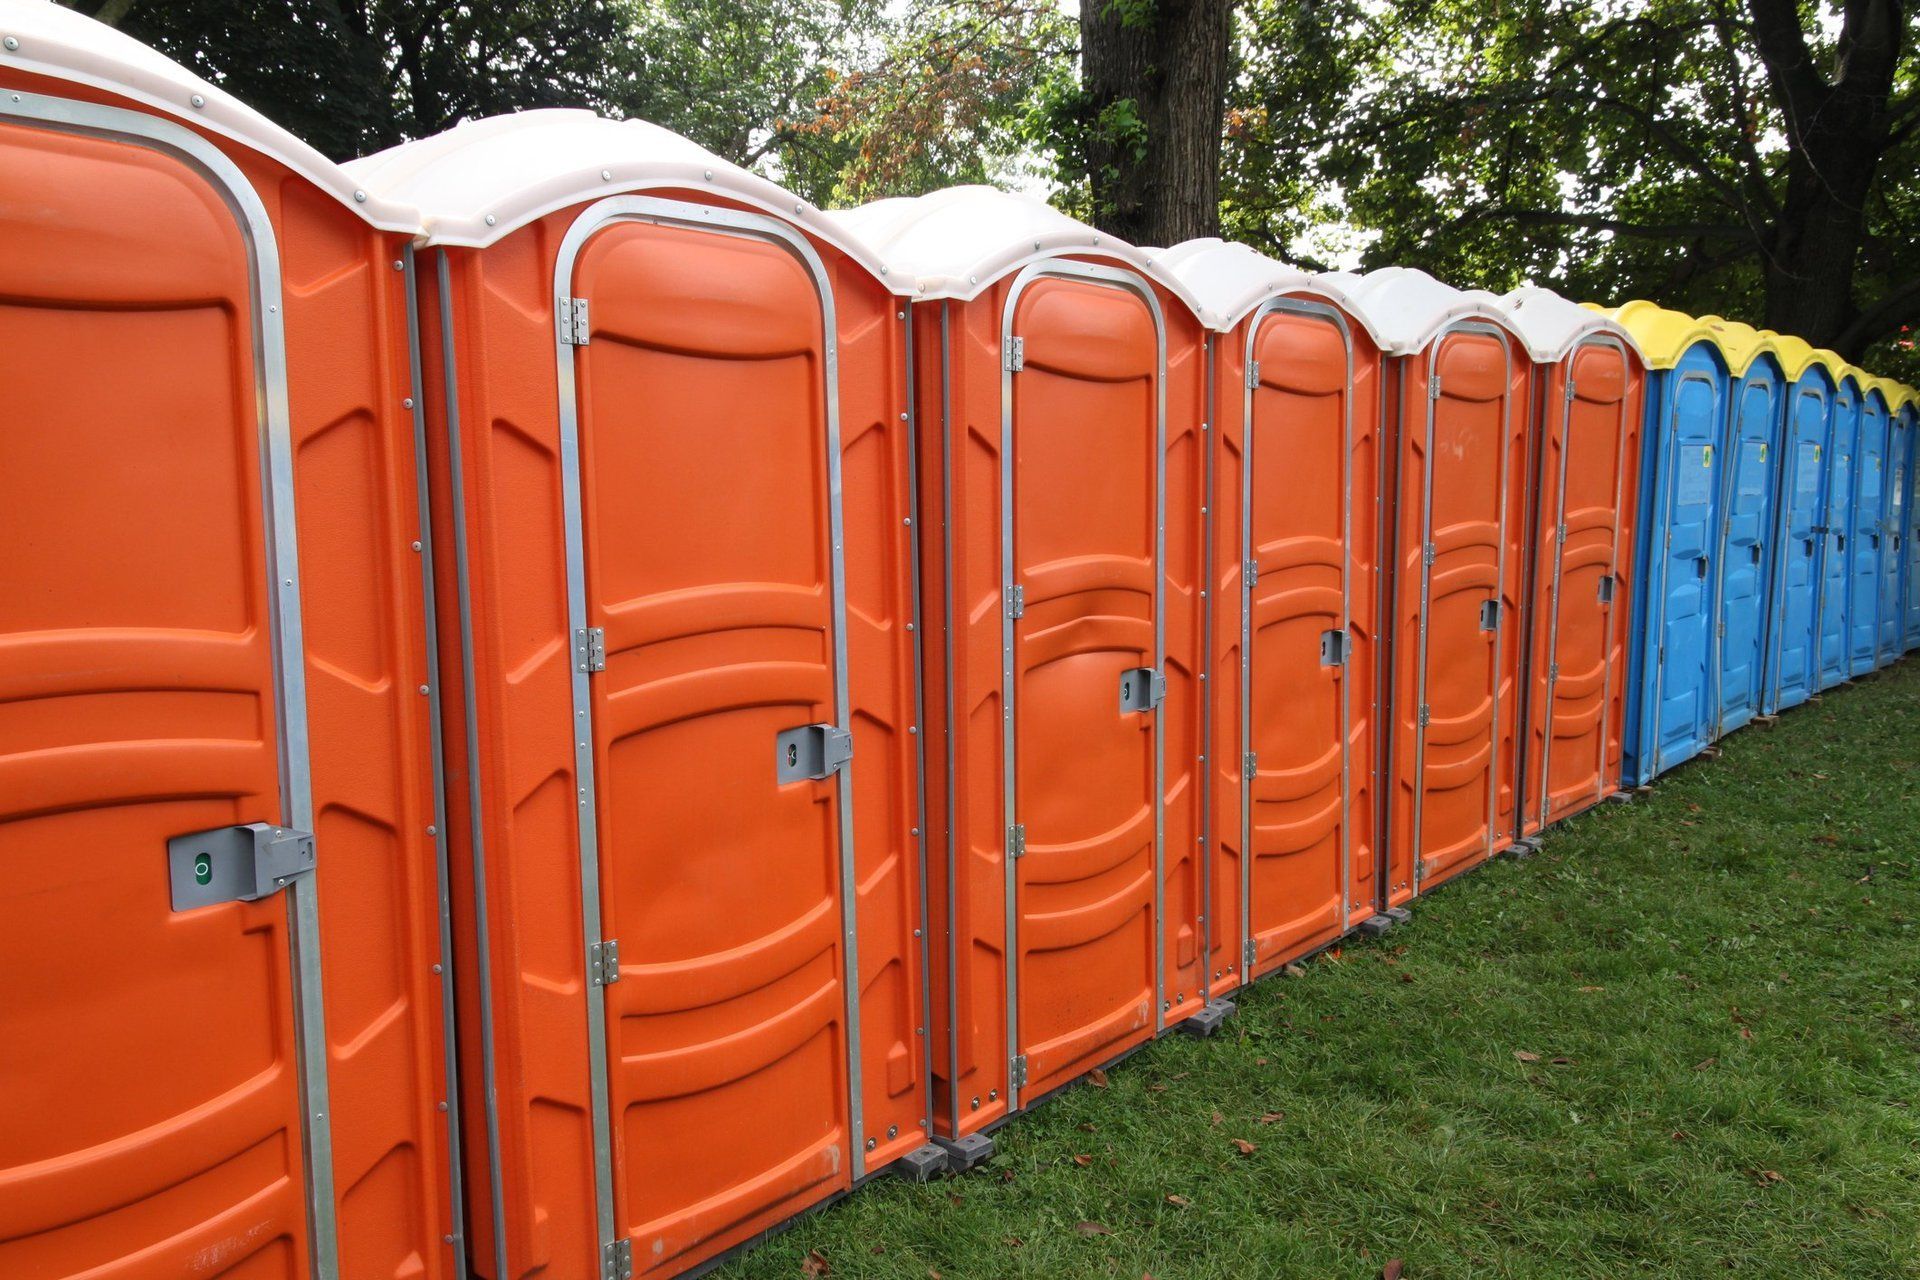 Row of Portable Toilets in Rockingham, NC